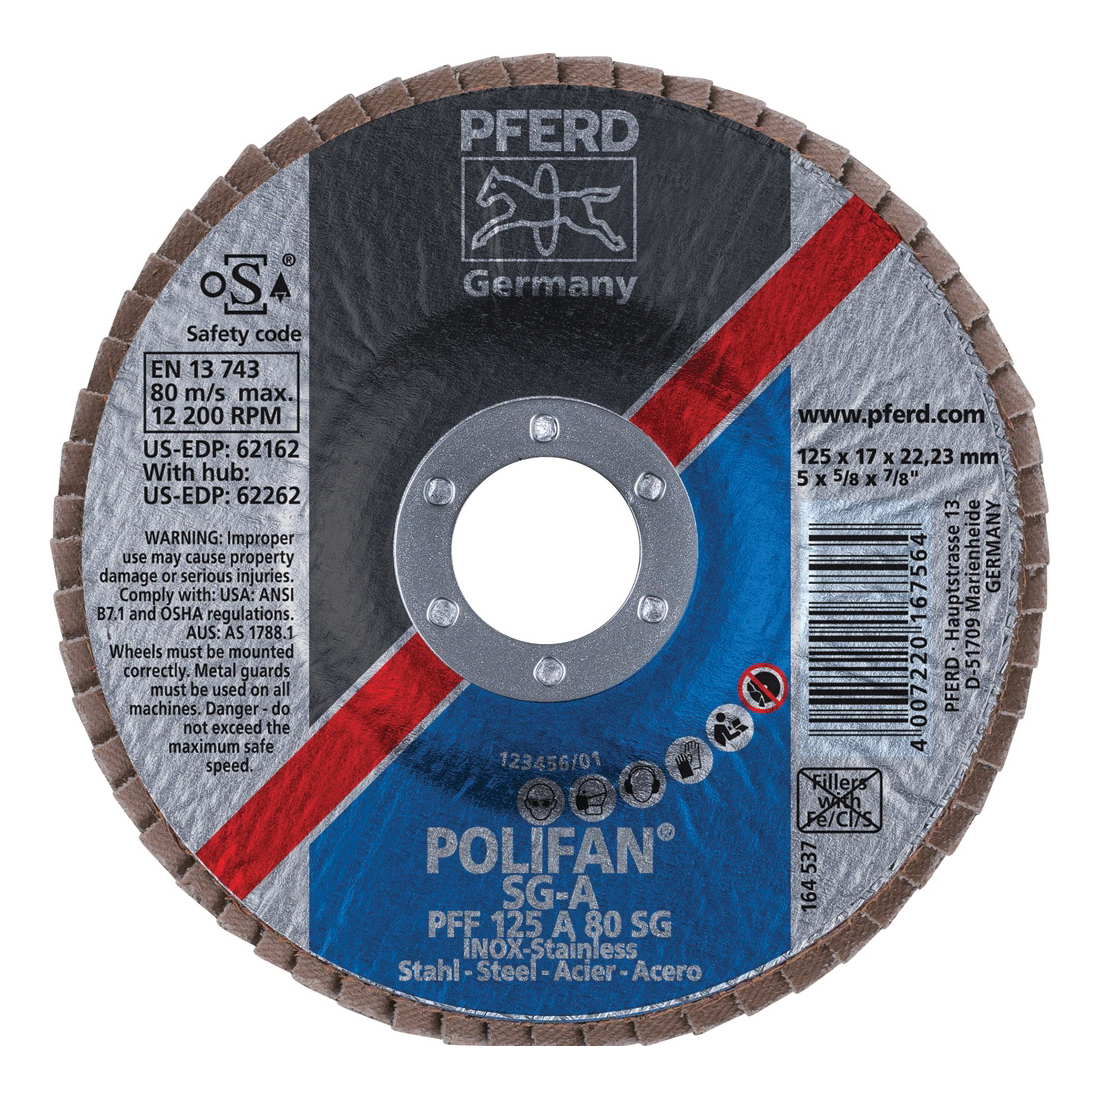 PFERD Polifan® 62162 Performance Line SG A Unthreaded Coated Abrasive Flap Disc, 5 in Dia, 7/8 in Center Hole, 80 Grit, Aluminum Oxide Abrasive, Type 27 Flat Disc